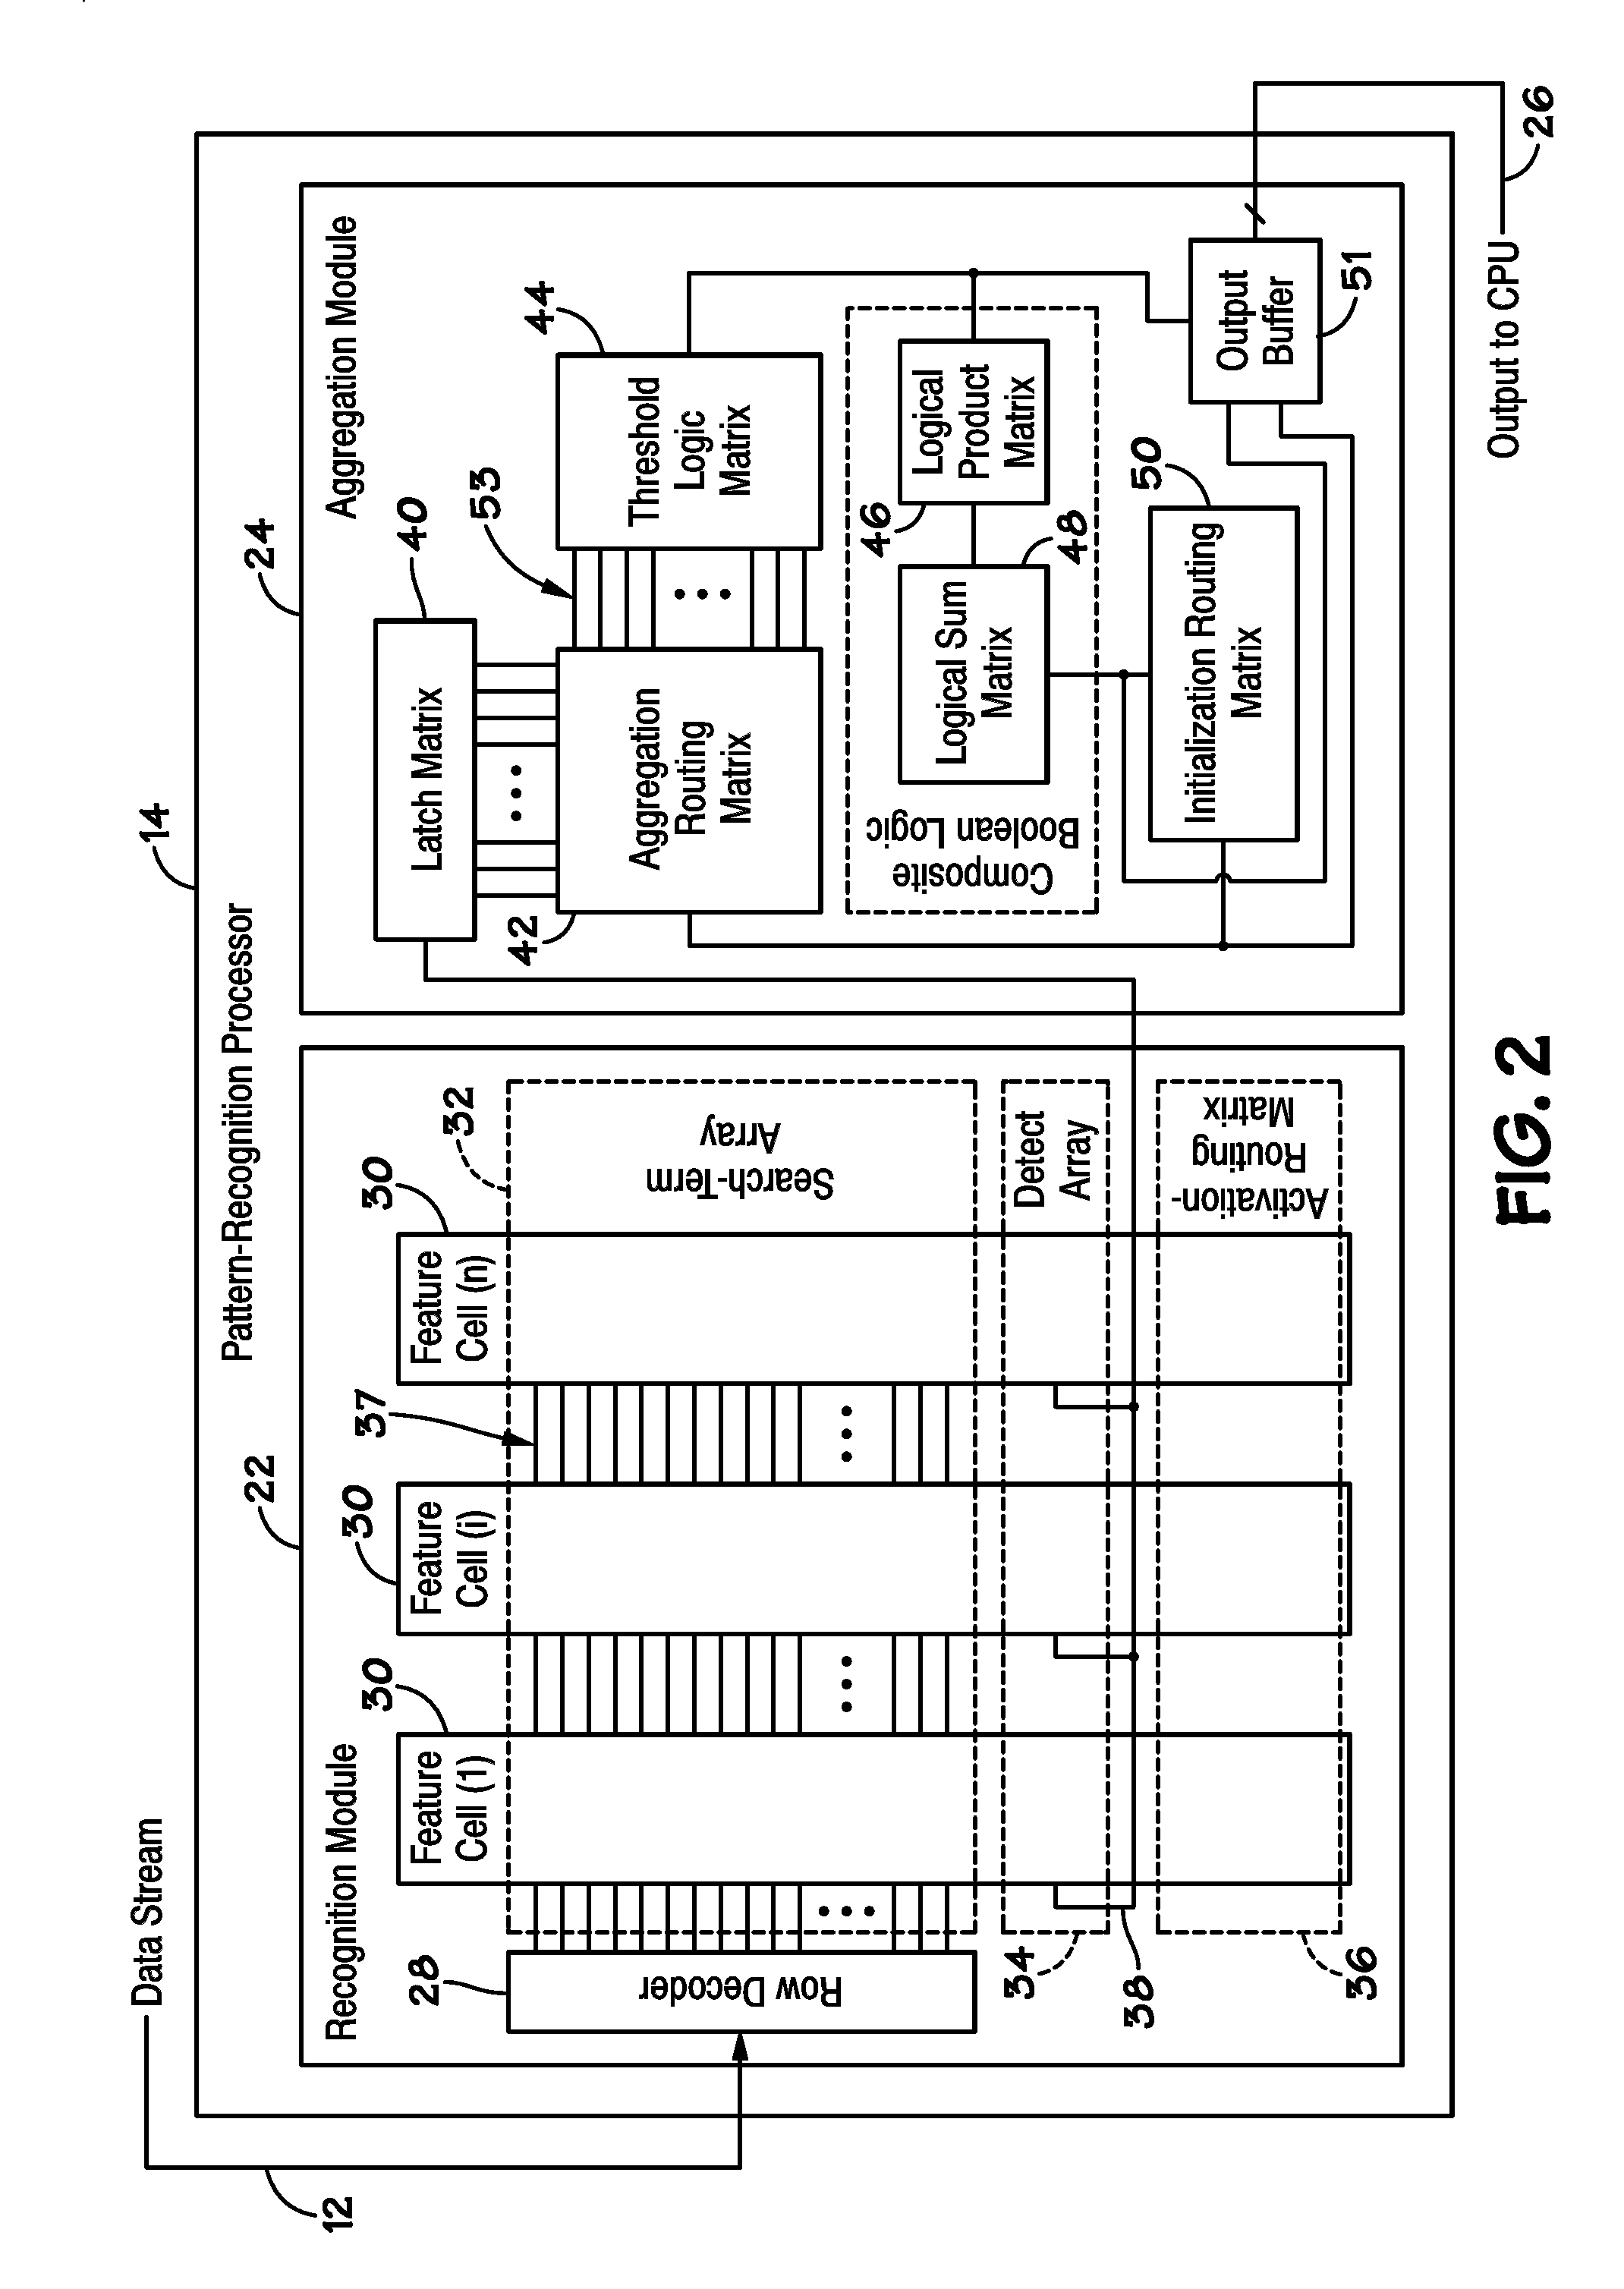 Methods and Devices for Saving and/or Restoring a State of a Pattern-Recognition Processor